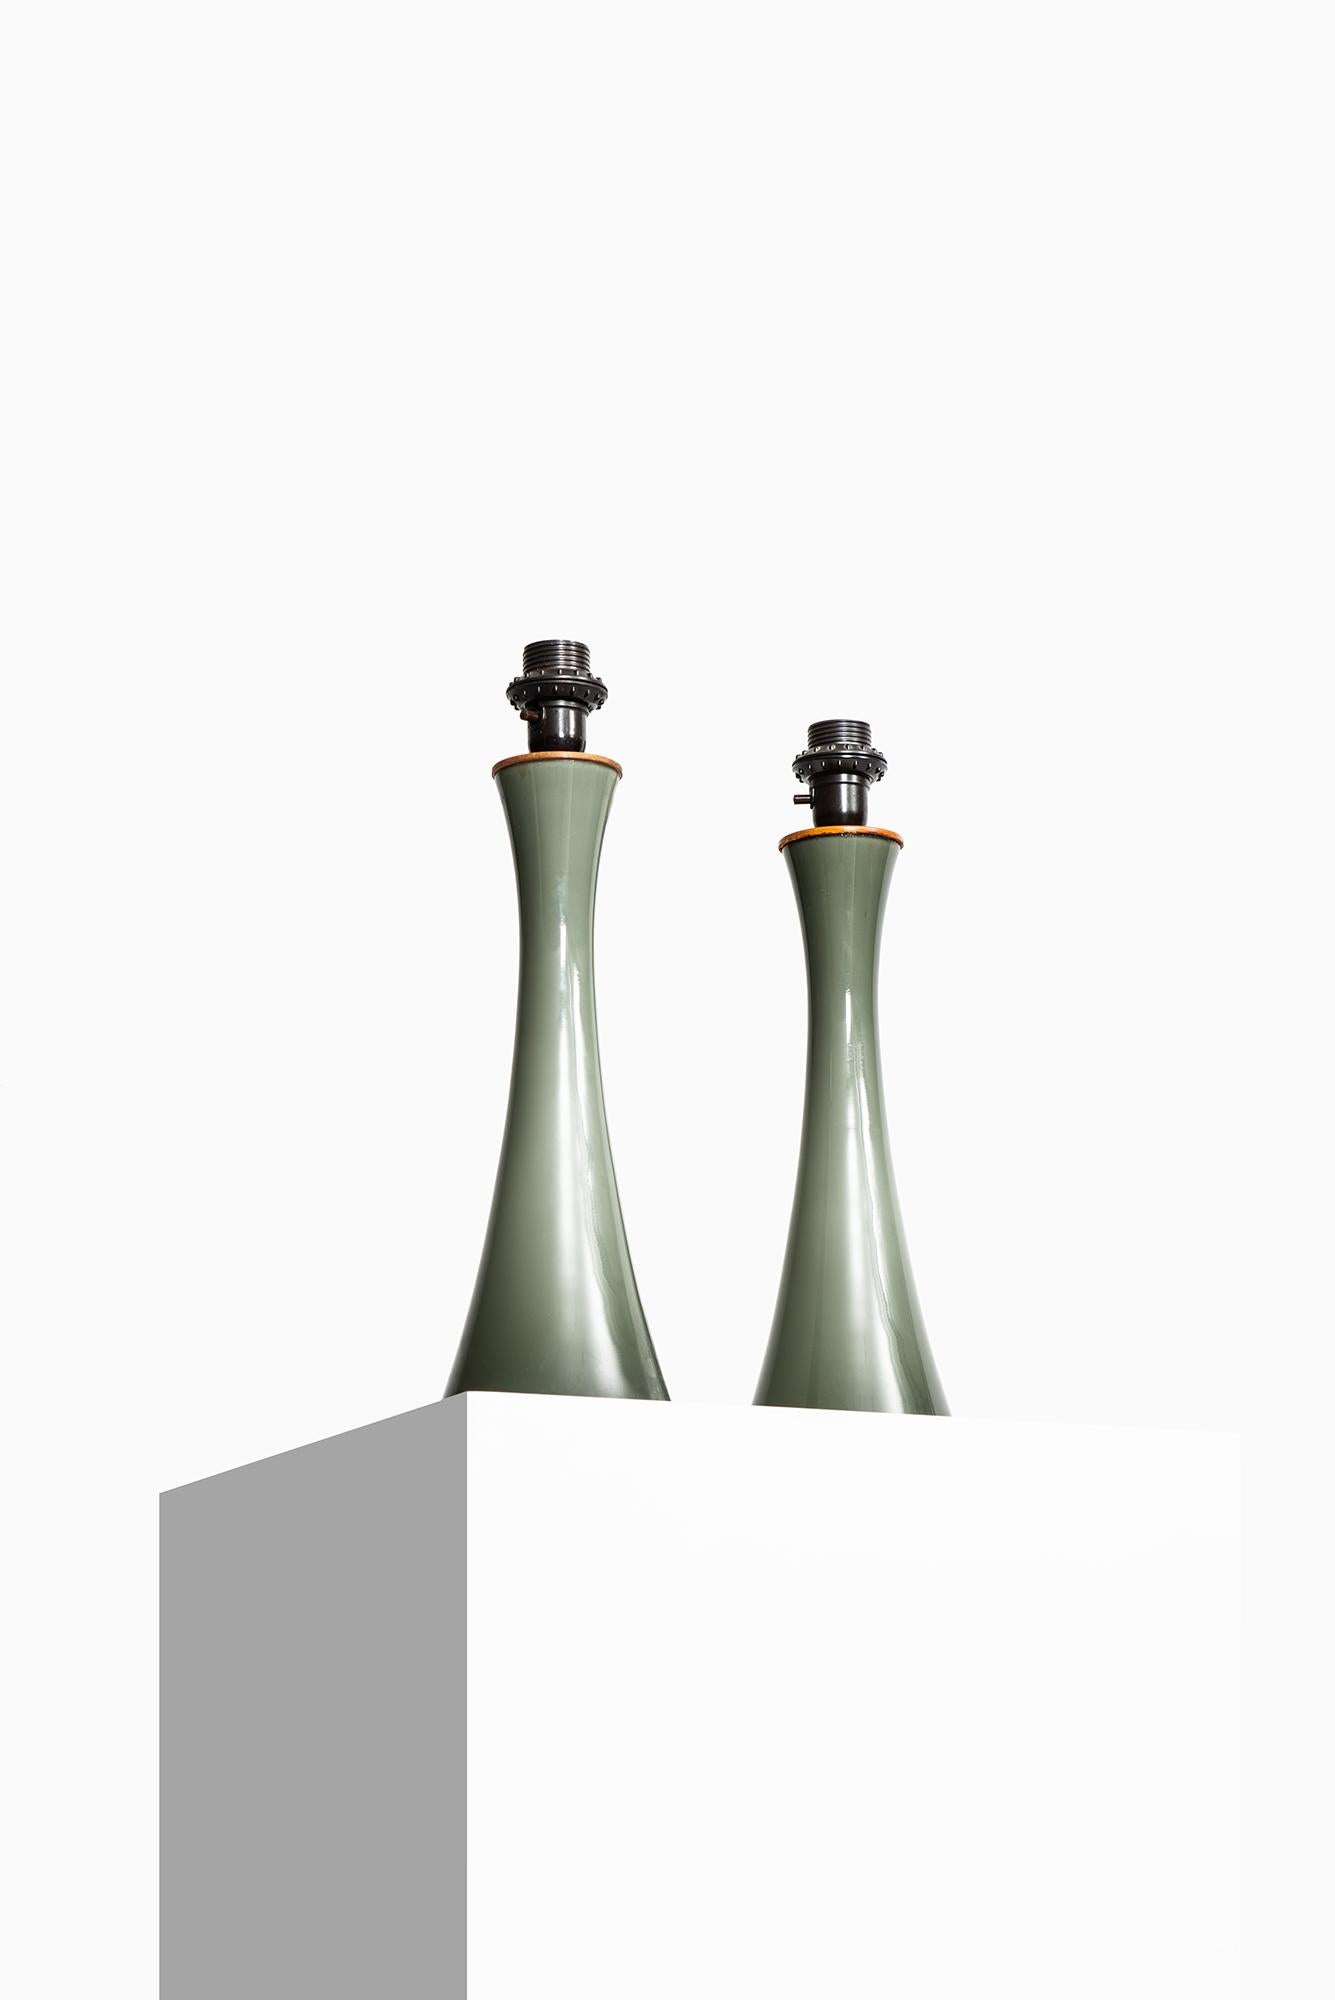 Pair of table lamps designed by Berndt Nordstedt. Produced by Bergbom in Sweden.